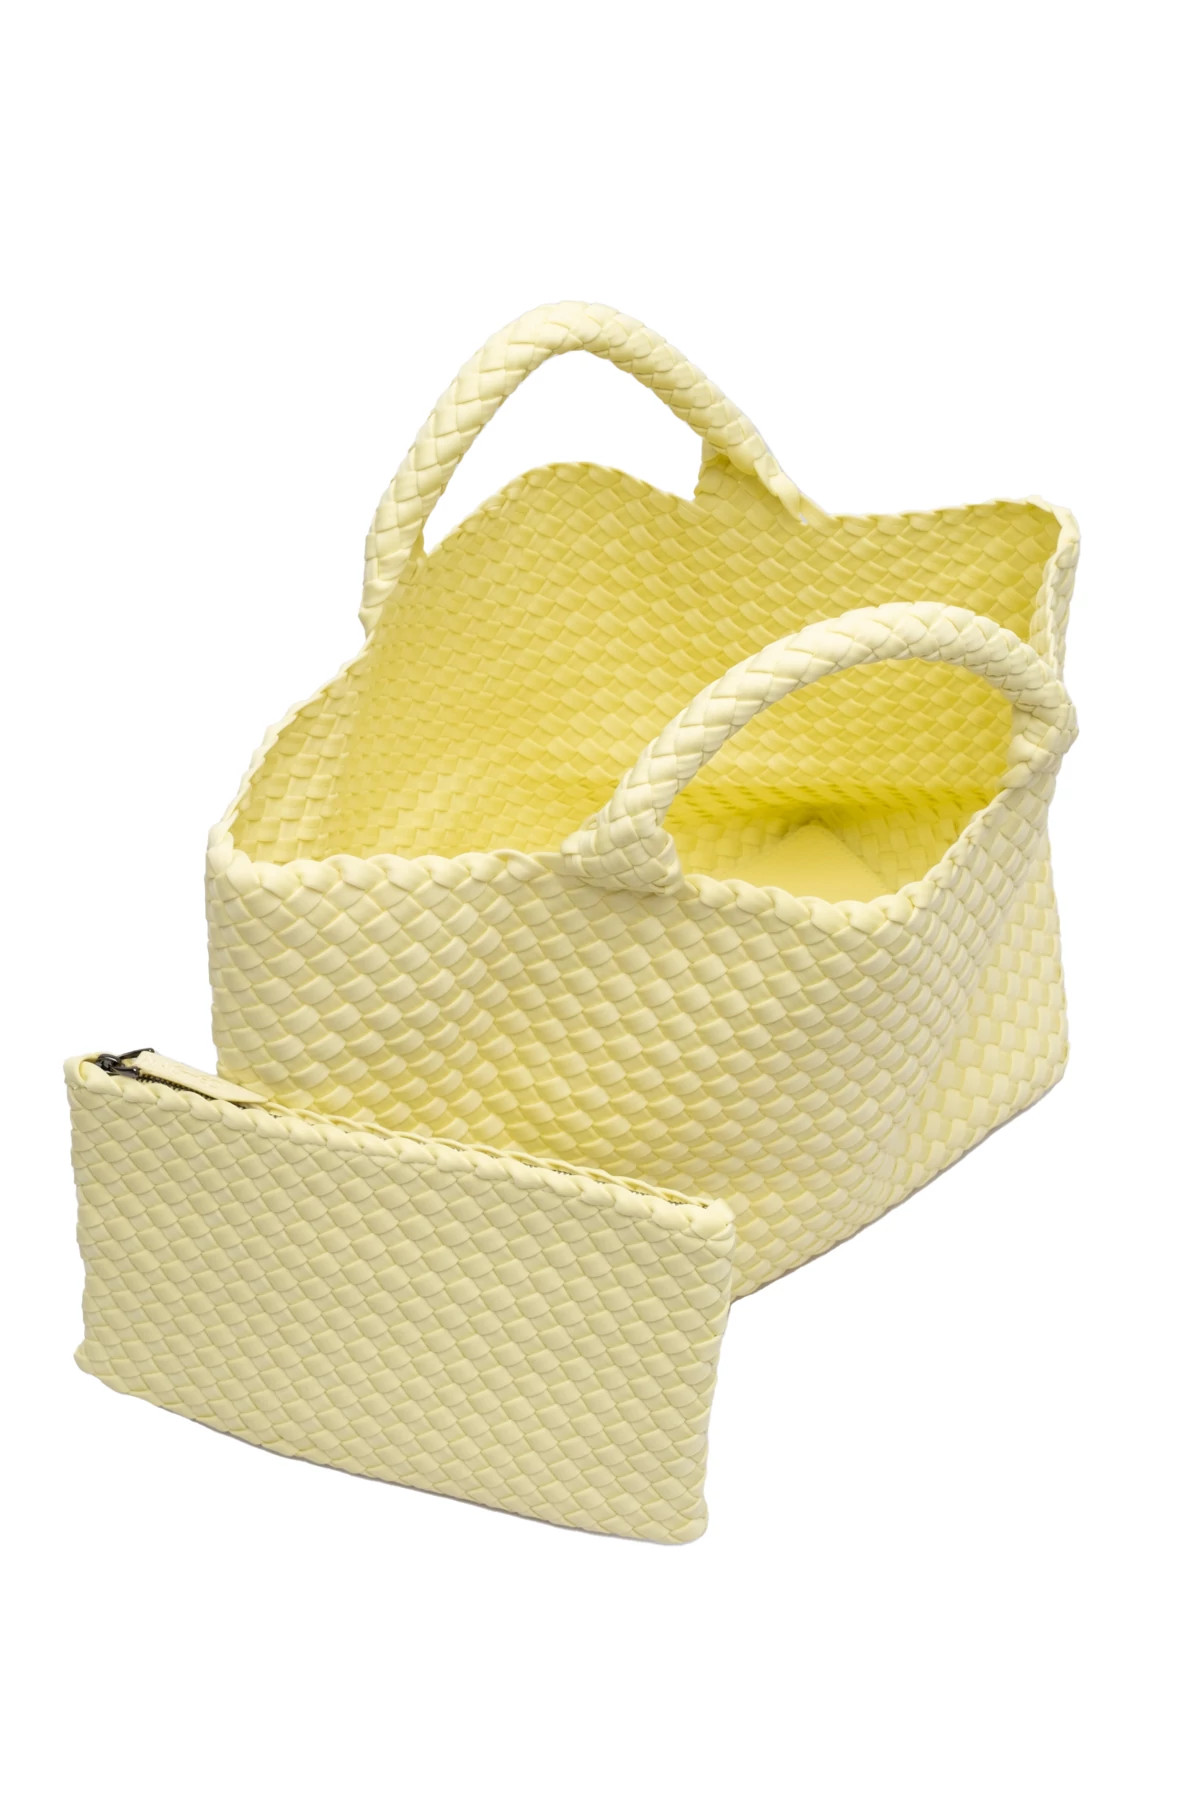 BUTTERCUP St. Barth Neoprene Tote image number 2